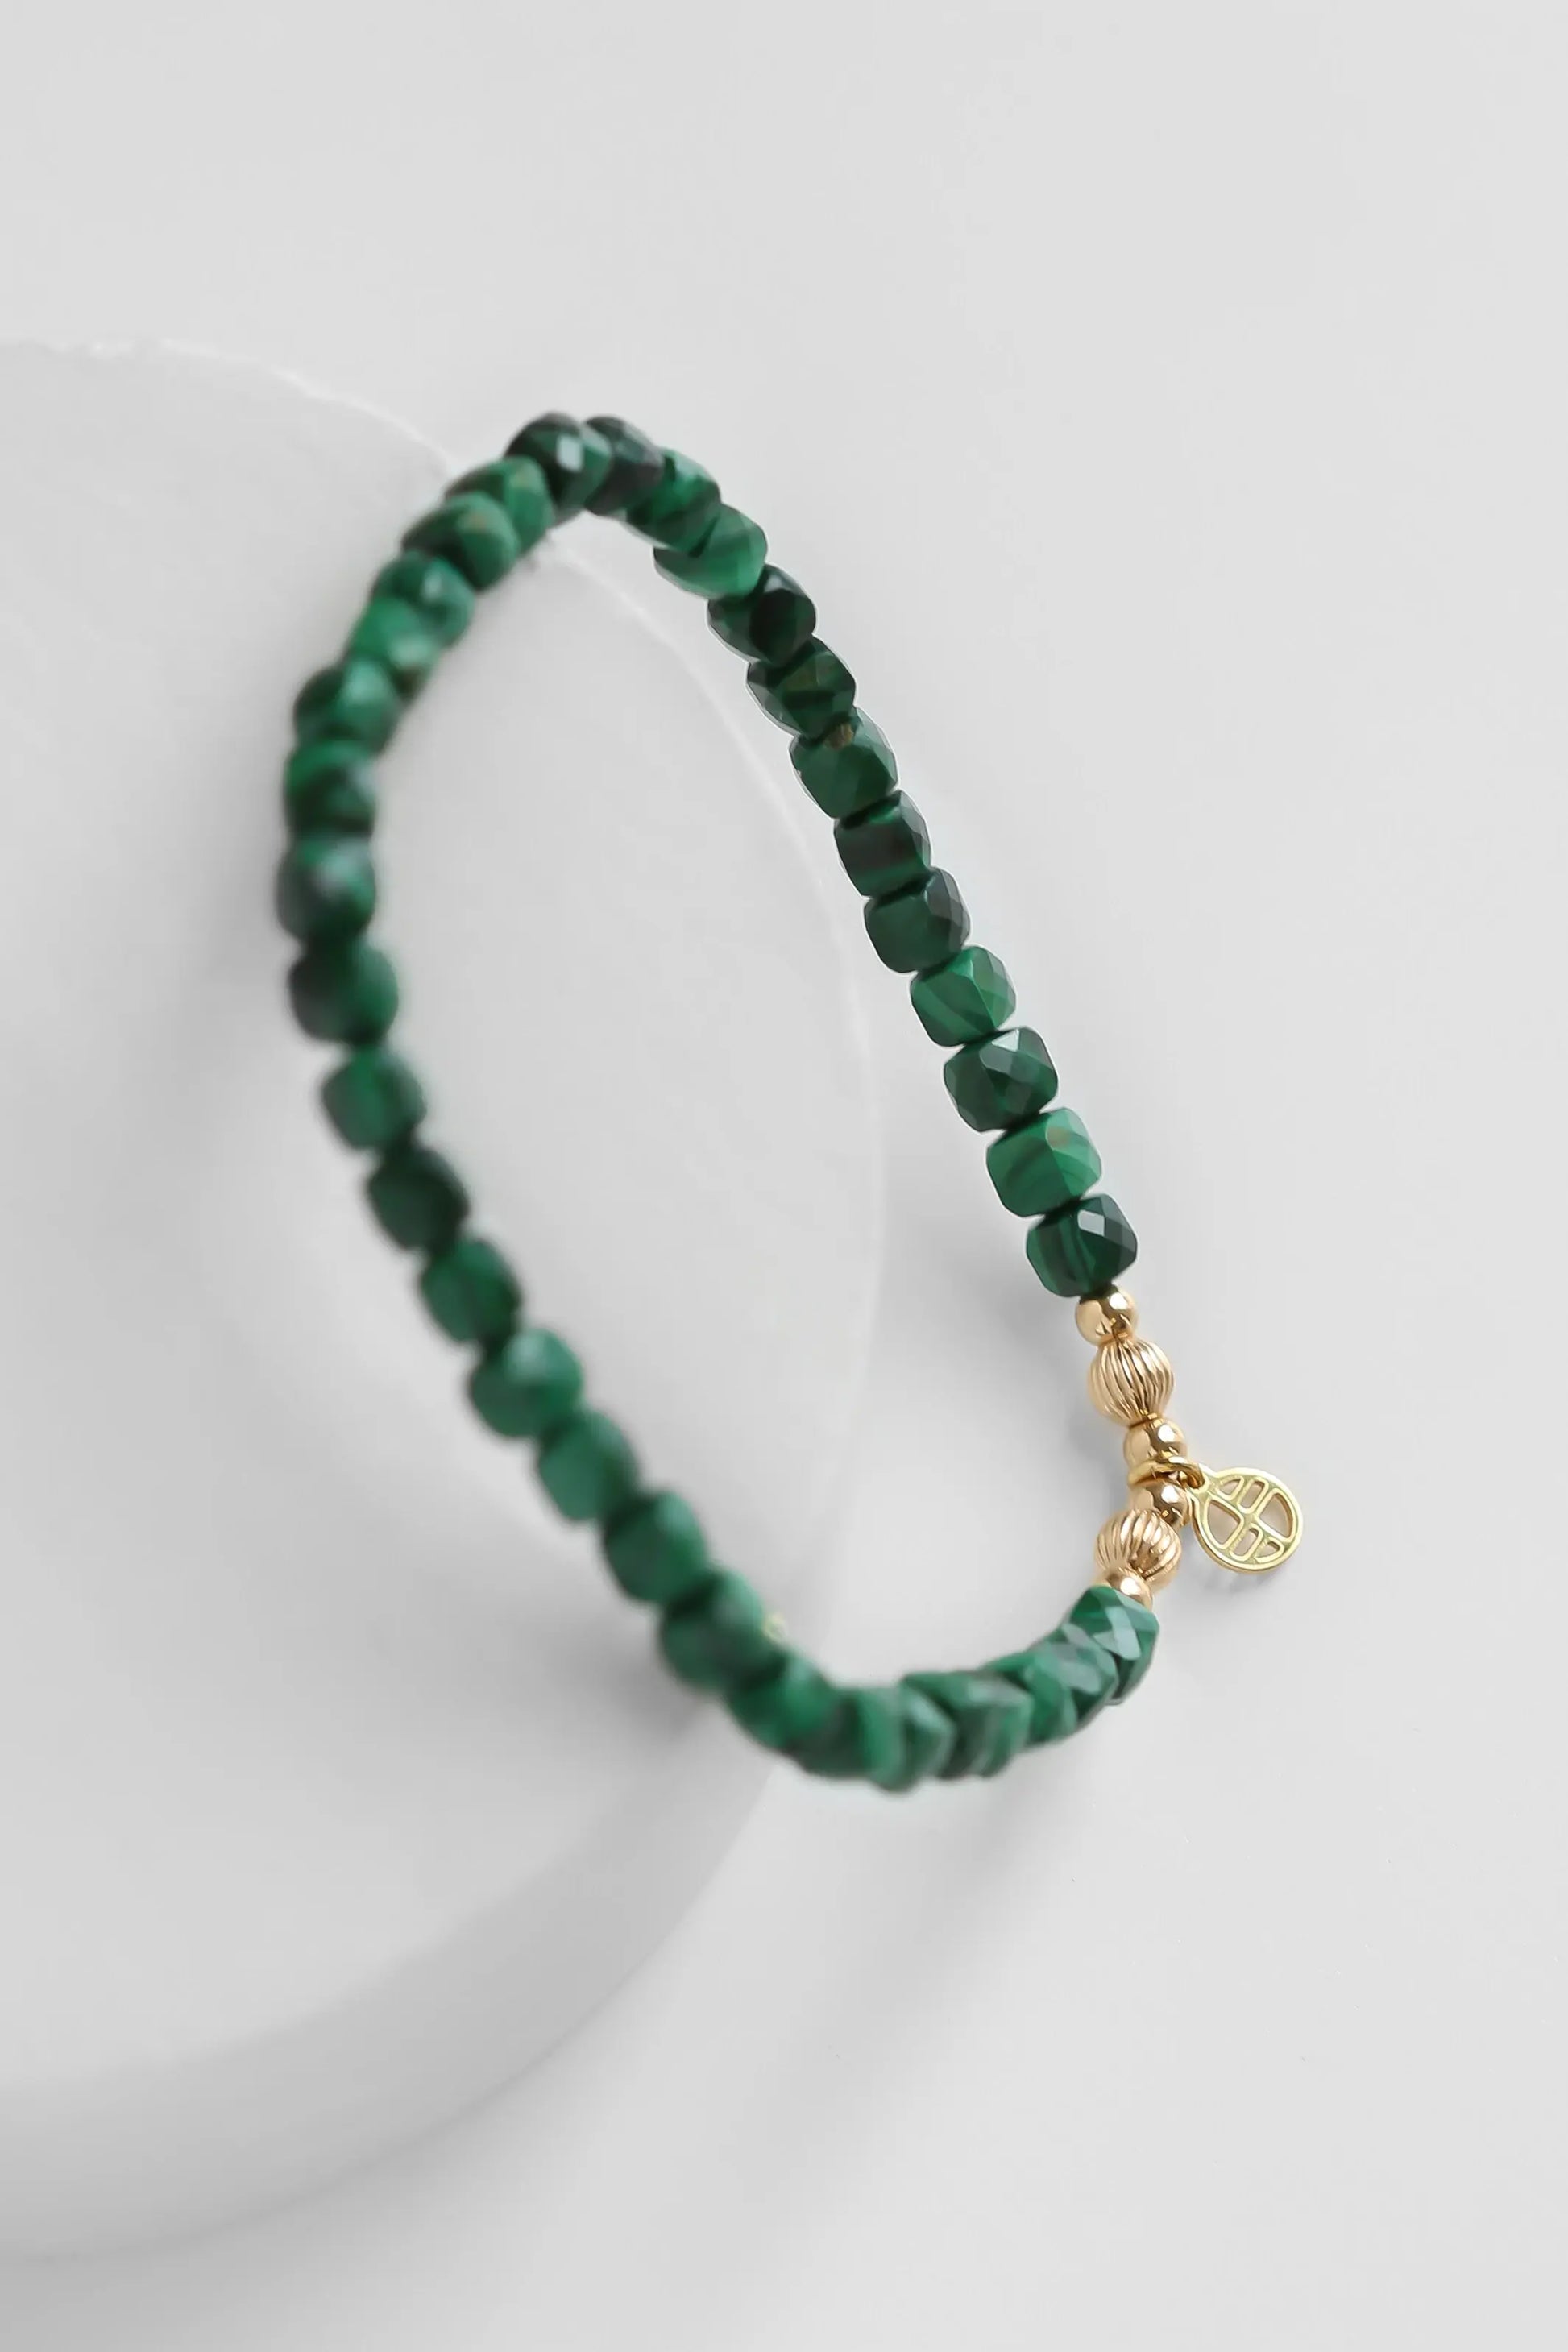 The    Fleetwood Bracelet Malachite by  Francesca Jewellery from the Bracelets Collection.